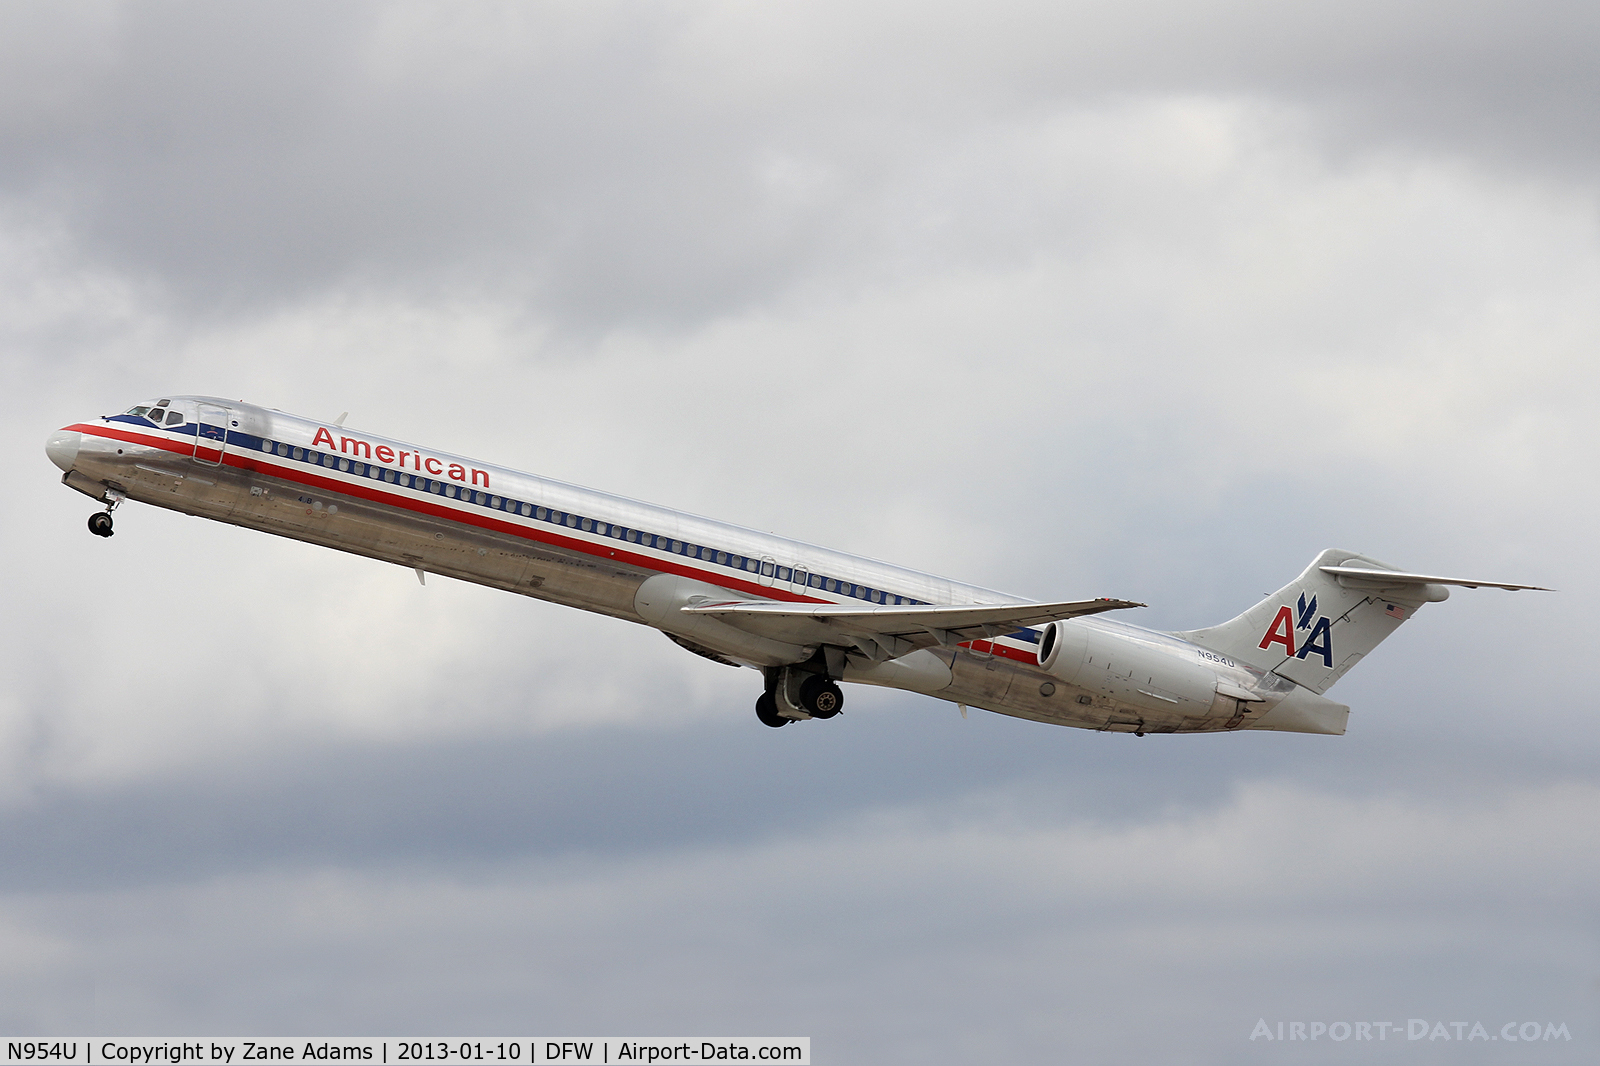 N954U, 1987 McDonnell Douglas MD-82 (DC-9-82) C/N 49426, American Airlines at DFW Airport